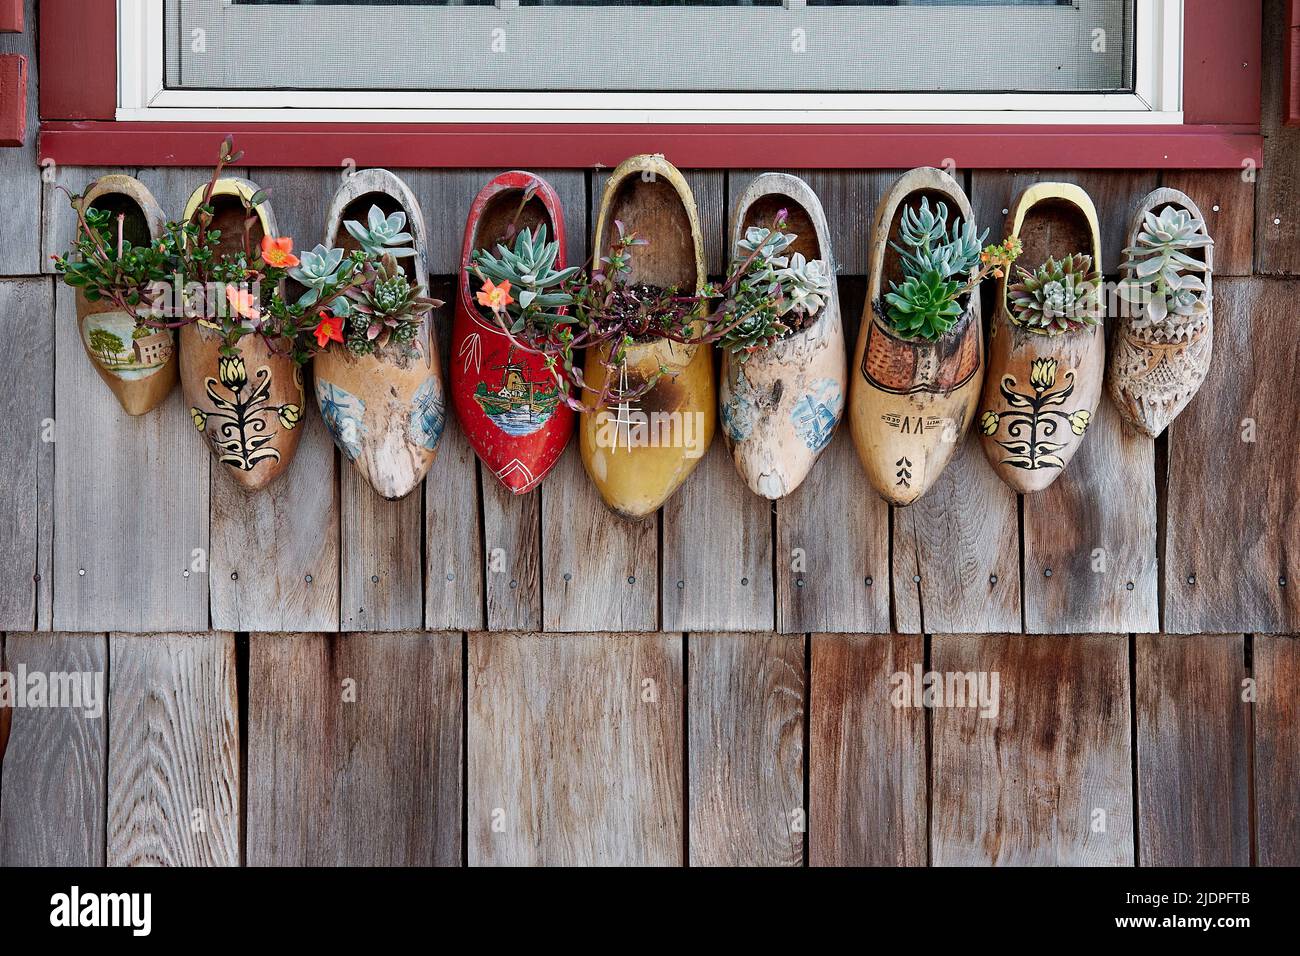 Festive wooden Dutch shoes are displayed below a residential window in Lewes, Delaware.  Lewes was founded as a Dutch trading post in 1632. Stock Photo